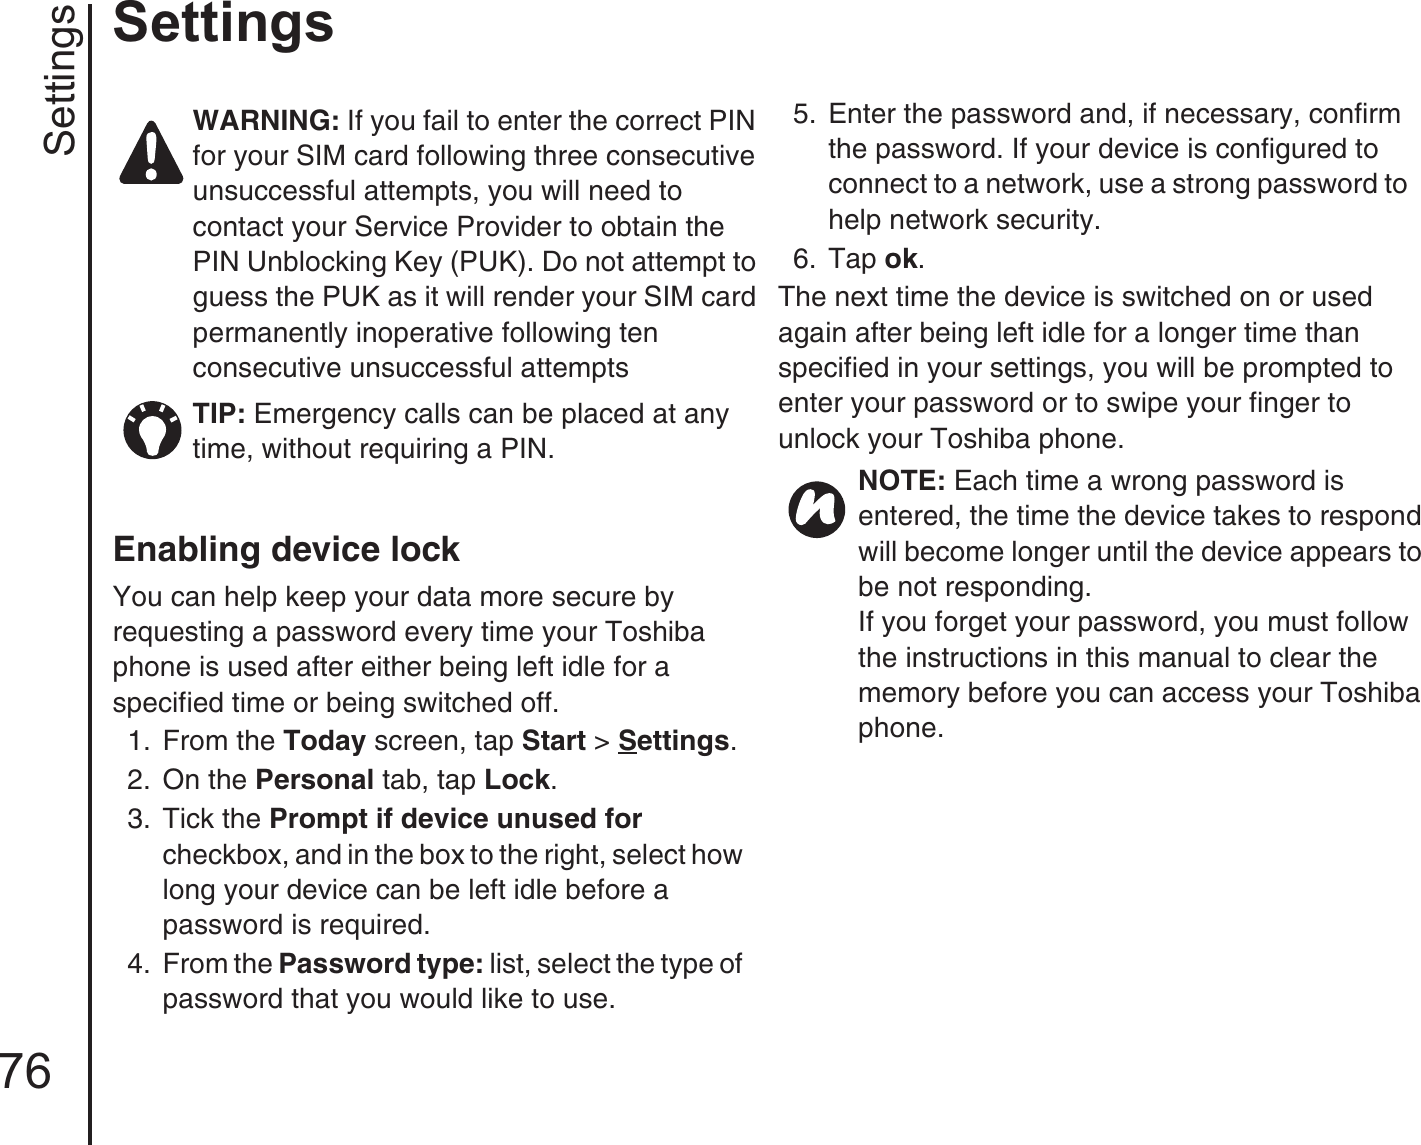 Settings76SettingsEnabling device lockYou can help keep your data more secure by requesting a password every time your Toshiba phone is used after either being left idle for a specified time or being switched off.1.  From the Today screen, tap Start &gt; Settings.2.  On the Personal tab, tap Lock. 3.  Tick the Prompt if device unused for checkbox, and in the box to the right, select how long your device can be left idle before a password is required.4.  From the Password type: list, select the type of password that you would like to use.5.  Enter the password and, if necessary, confirm the password. If your device is configured to connect to a network, use a strong password to help network security.6.  Tap ok.The next time the device is switched on or used again after being left idle for a longer time than specified in your settings, you will be prompted to enter your password or to swipe your finger to unlock your Toshiba phone.WARNING: If you fail to enter the correct PIN for your SIM card following three consecutive unsuccessful attempts, you will need to contact your Service Provider to obtain the PIN Unblocking Key (PUK). Do not attempt to guess the PUK as it will render your SIM card permanently inoperative following ten consecutive unsuccessful attemptsTIP: Emergency calls can be placed at any time, without requiring a PIN. NOTE: Each time a wrong password is entered, the time the device takes to respond will become longer until the device appears to be not responding.If you forget your password, you must follow the instructions in this manual to clear the memory before you can access your Toshiba phone. 